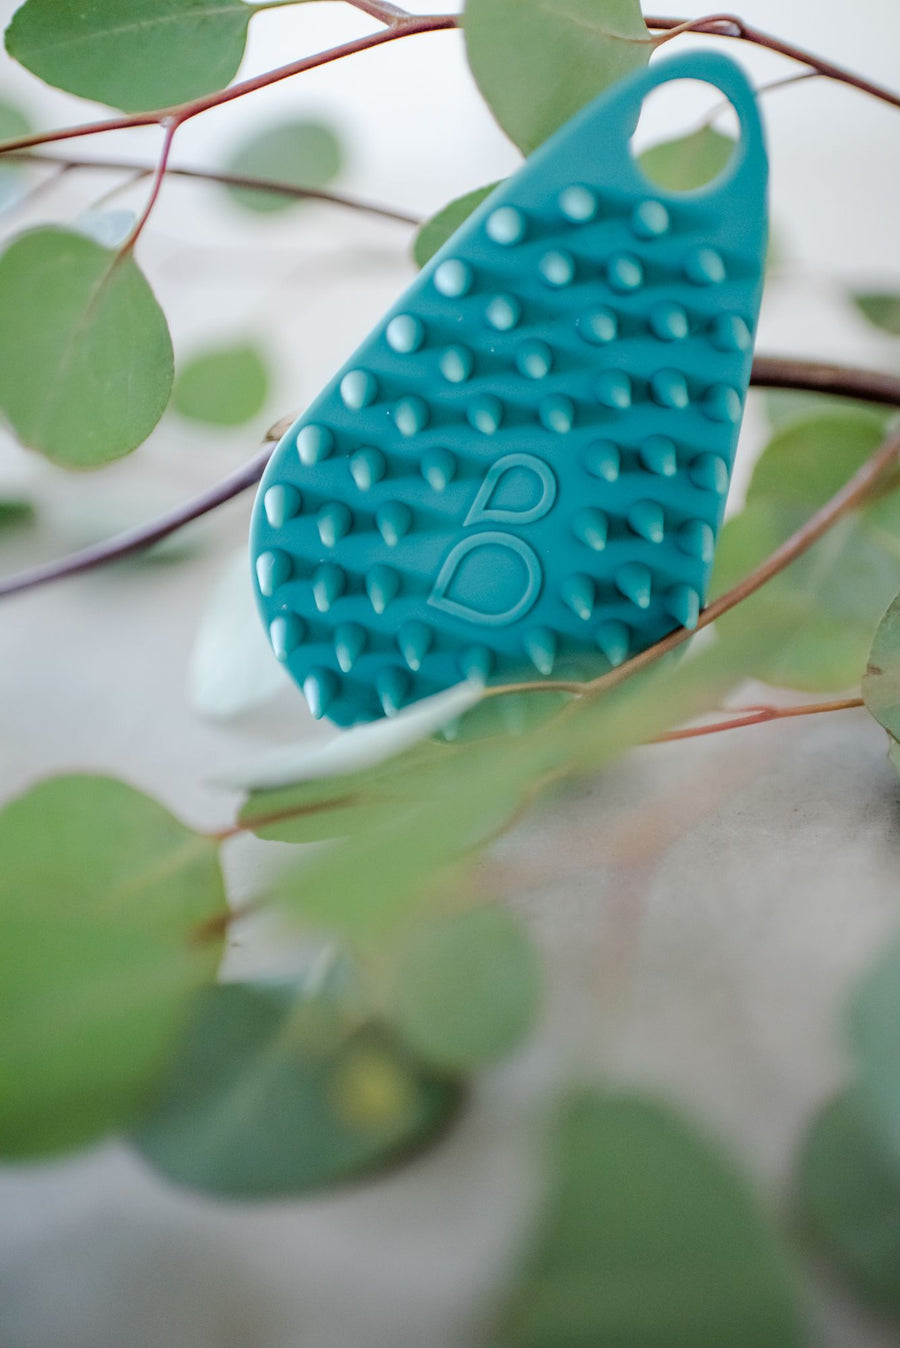 Scrub-dub™ body scrubber in teal is surrounded by green eucalyptus plats.